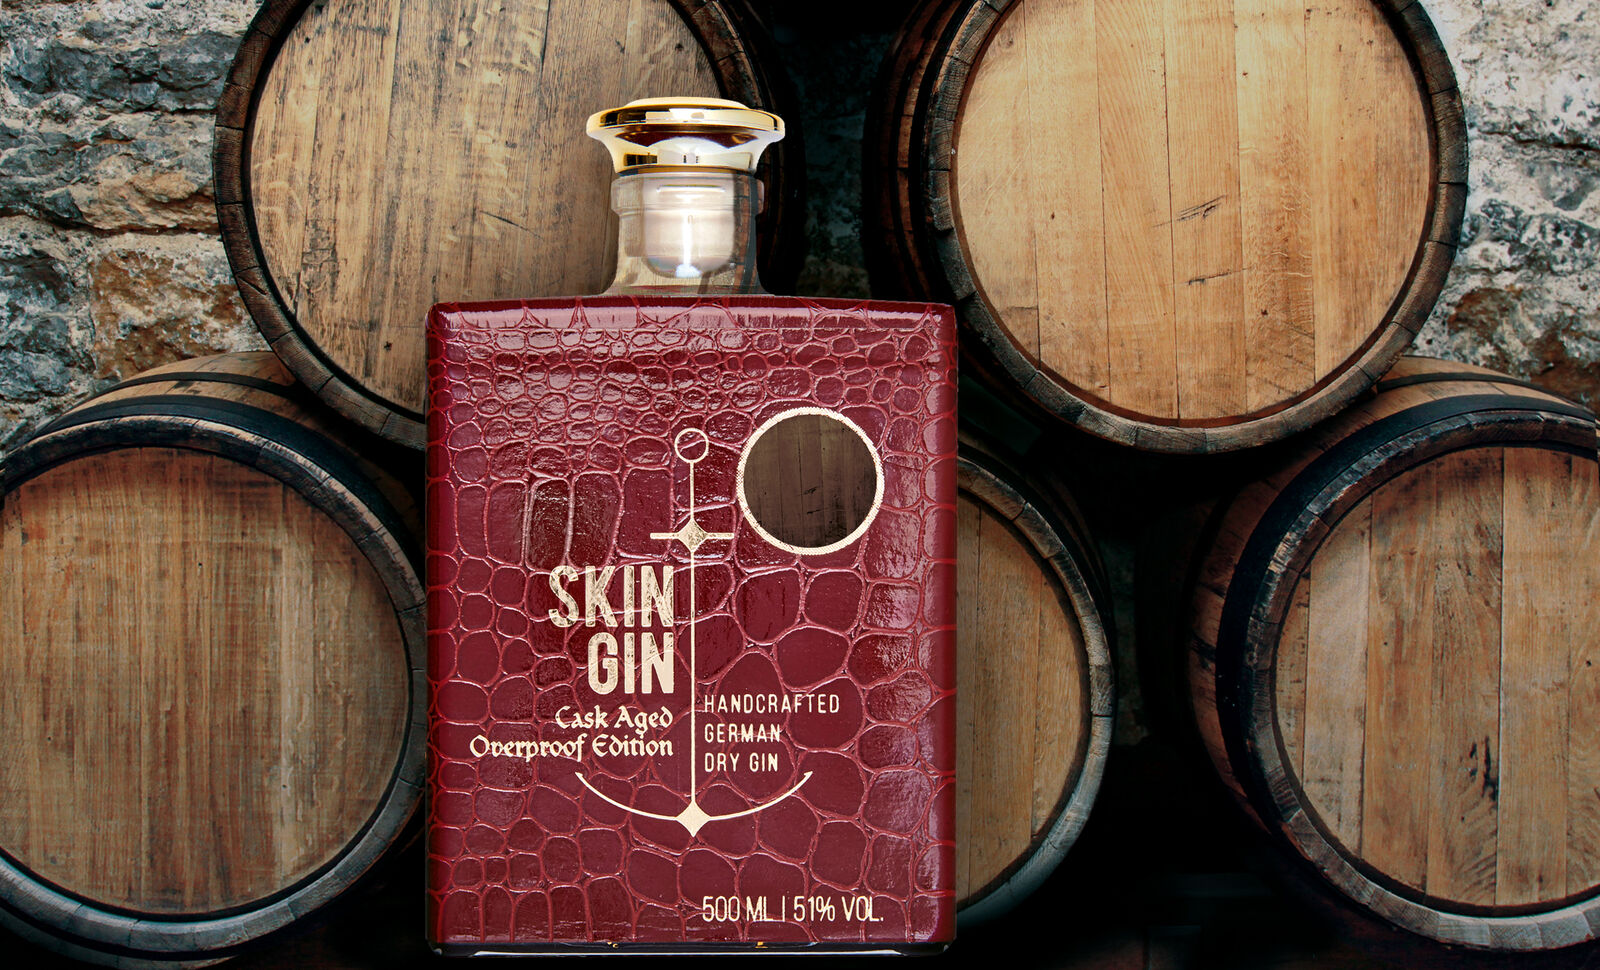 Skin Gin Cask Aged Overproof Edition